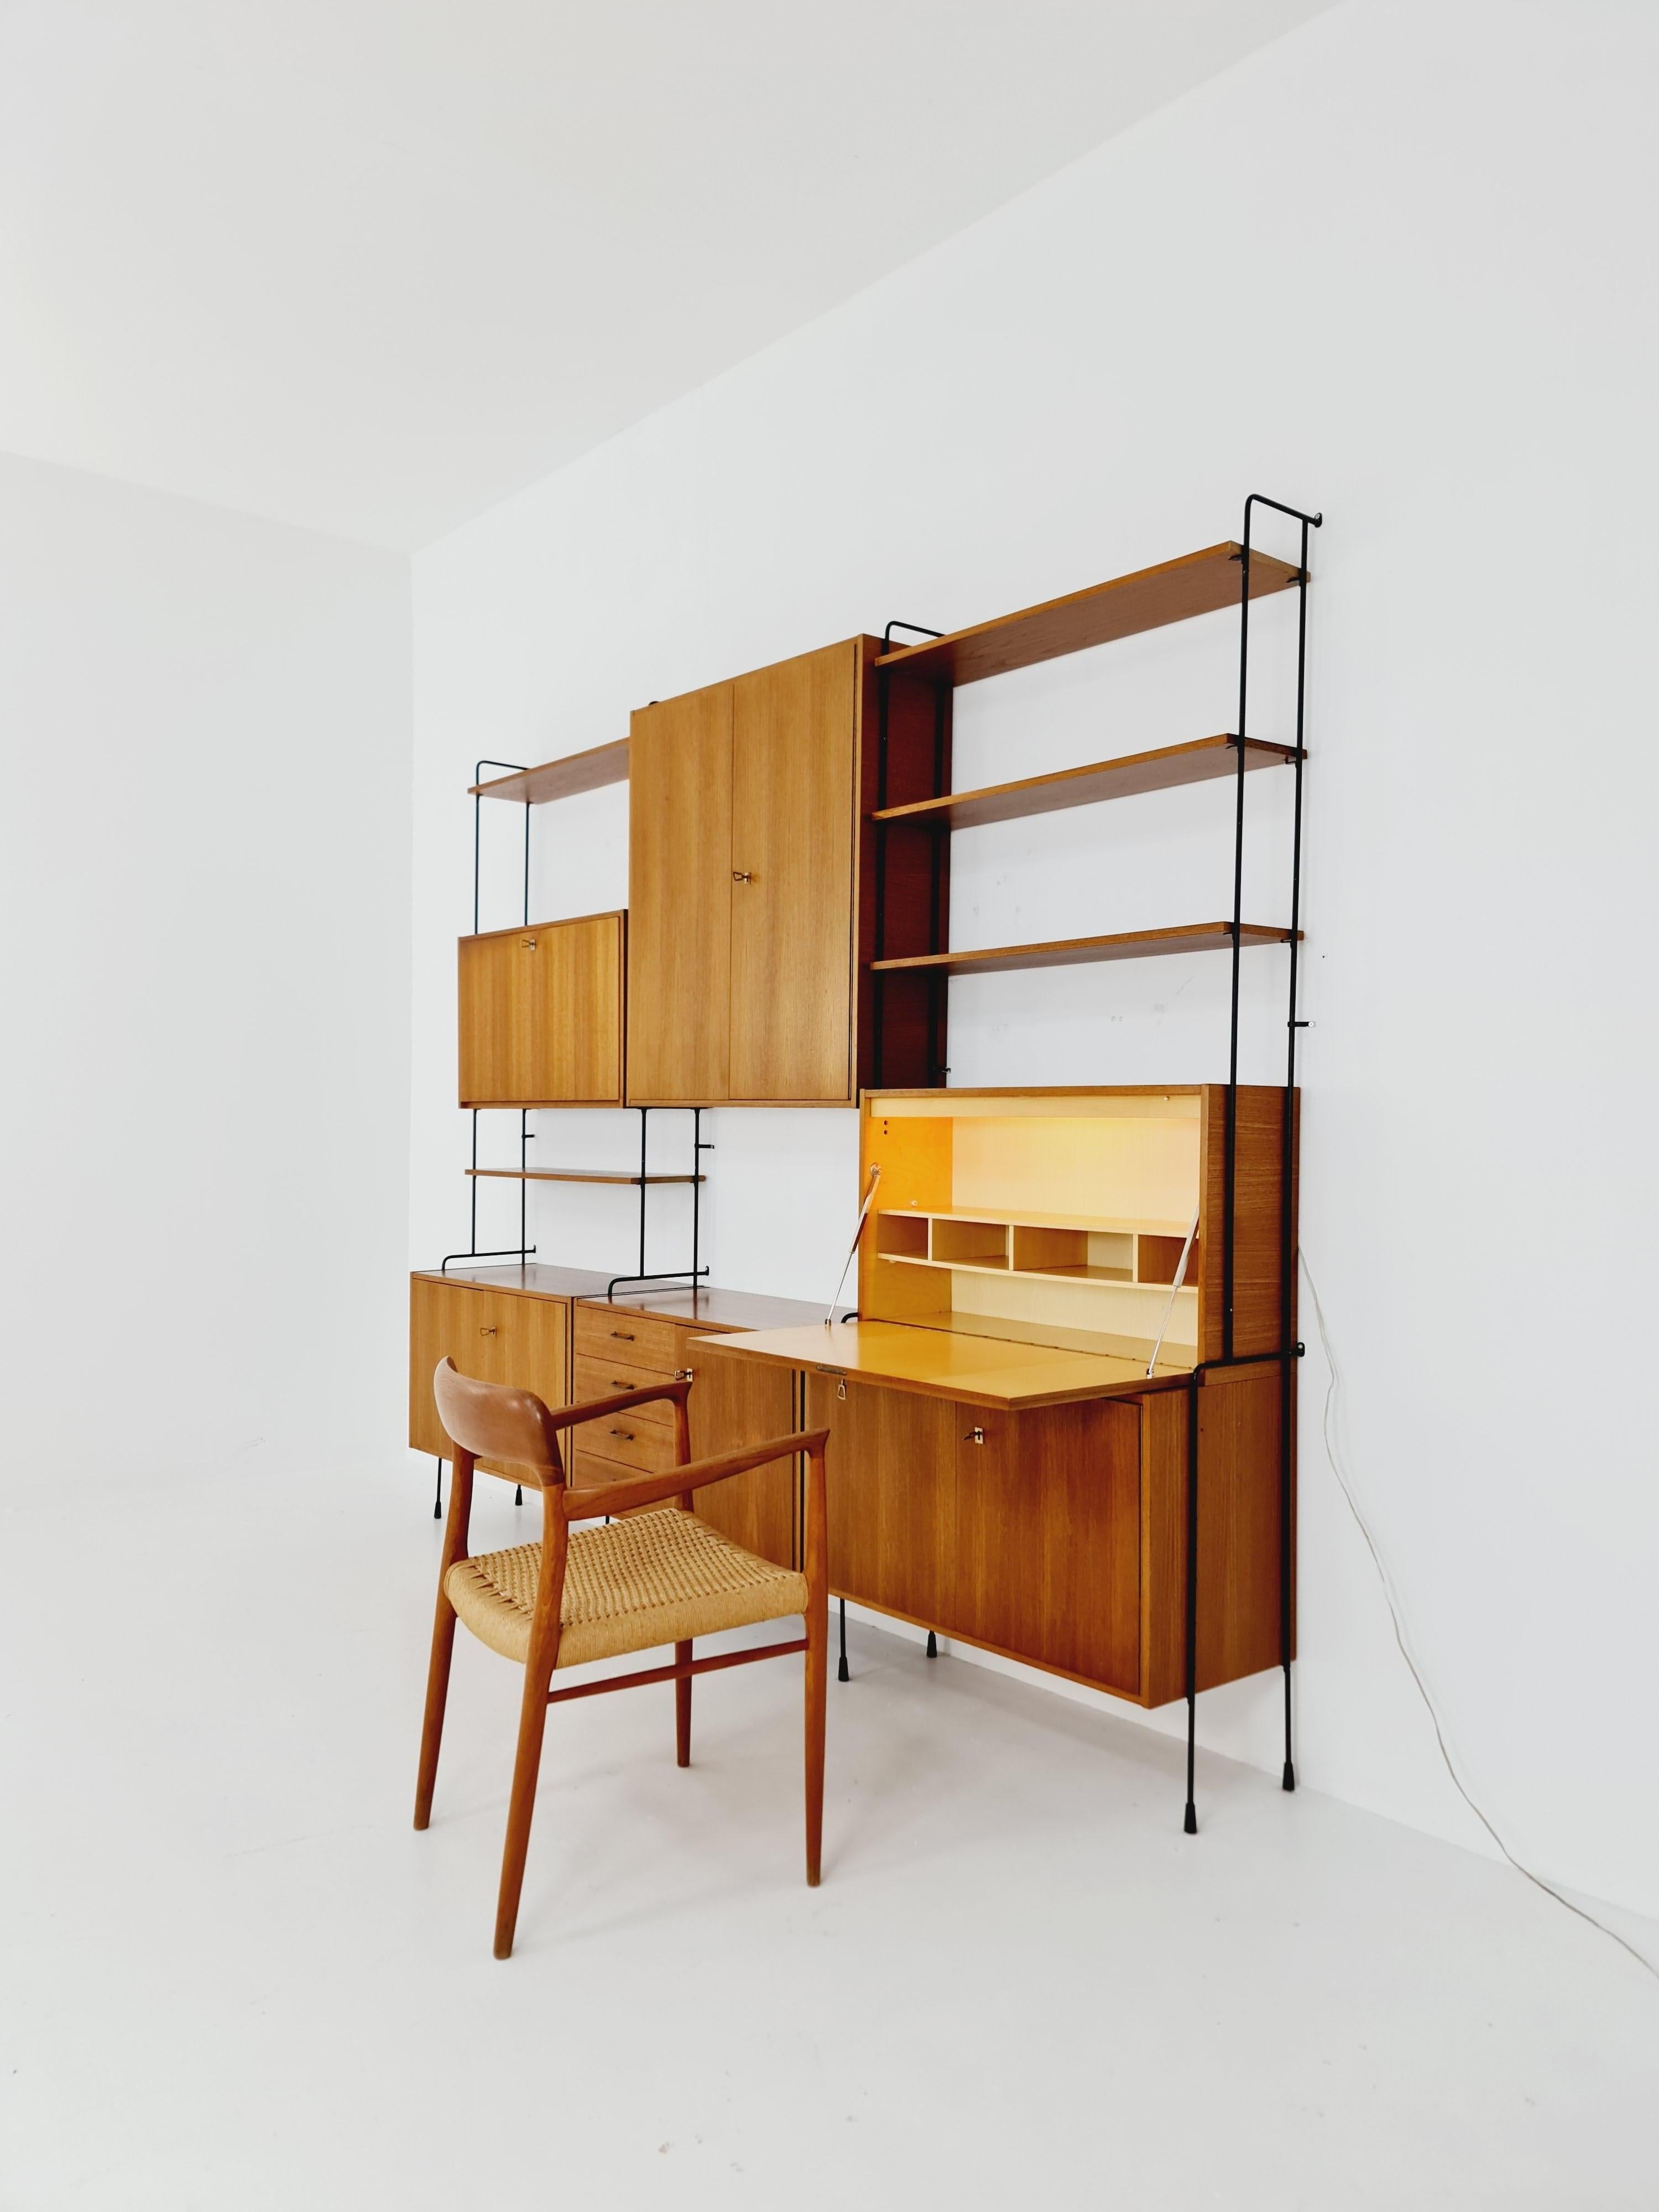 Mid century Teak 8 pieces shelving unit by Hilker for Omnia, Germany 1960s

Designed by Hilker -- The individual units and shelves can have multiple configuration options - Featuring a drinks cabinet & 
 secrtary  The frame is fixed to the wall with